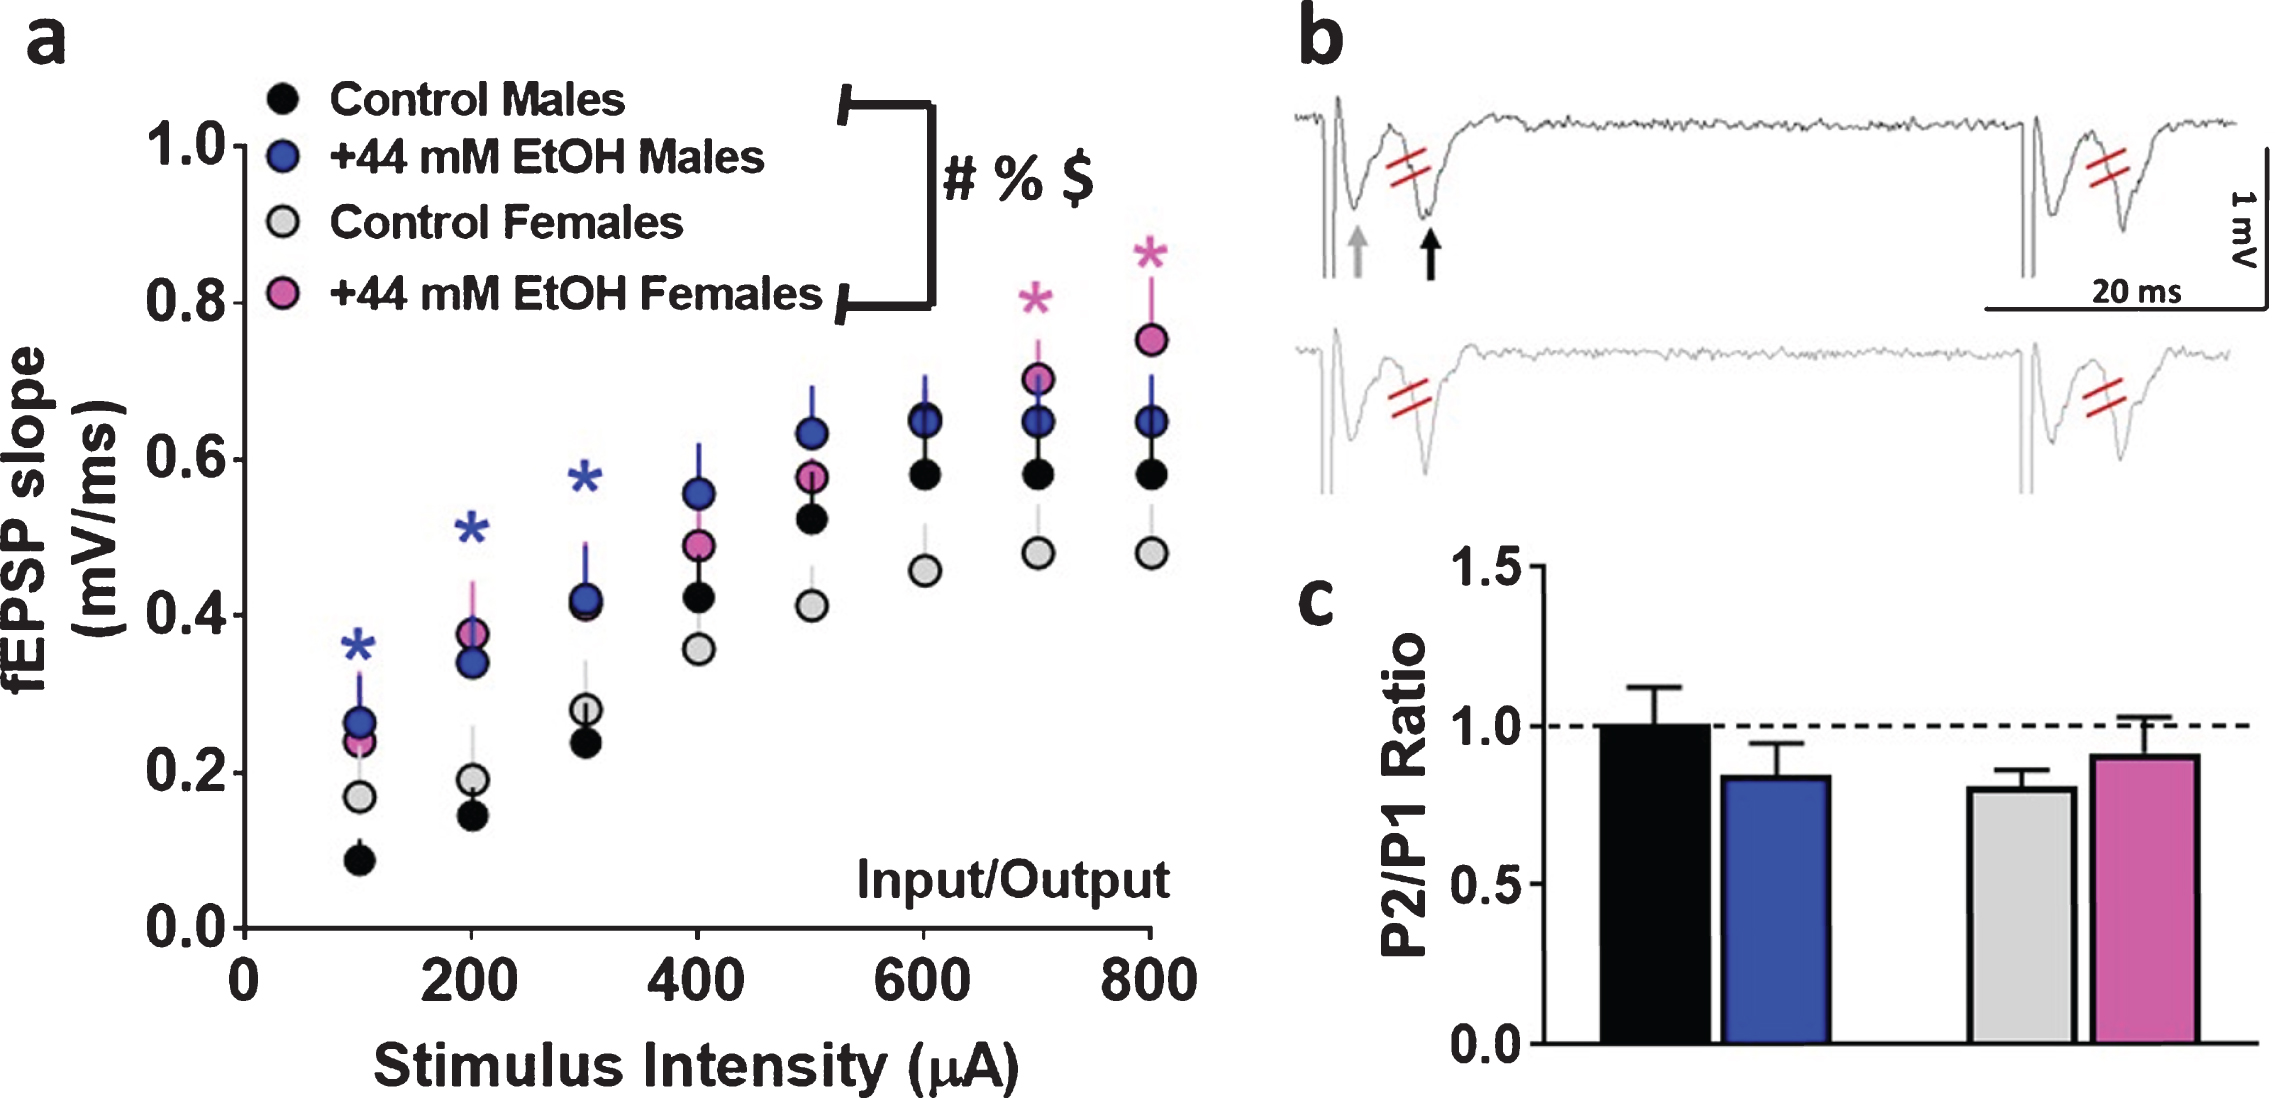 Basal synaptic transmission and short-term plasticity in dorsomedial striatal slices from adult male and female rats. (a) Input/output (I/O) curve obtained by plotting the slope of fEPSPs as a function of the stimulation intensity (from 100 to 800μA) in the dorsomedial striatum. (b) Representative raw trace of paired-pulse from one control male (black, top trace) and one control female (gray, bottom trace) rat. Gray arrow in the top trace points to fiber volley and black arrow in the top trace points to fEPSPs. fEPSP slope was measured between the two red lines. (c) Paired-pulse ratio recorded from one interstimulus interval at 50 ms. Data are represented as mean±S.E.M.. Number of slices: n = 14 control male, n = 13 EtOH male, n = 9 control female, n = 8 EtOH female. #p < 0.05 significant interaction, %p < 0.05 main effect of EtOH, $p < 0.05 main effect of stimulus intensity by three-way ANOVA. *p < 0.05 vs. control group within each sex by Fisher’s LSD post-hoc tests.